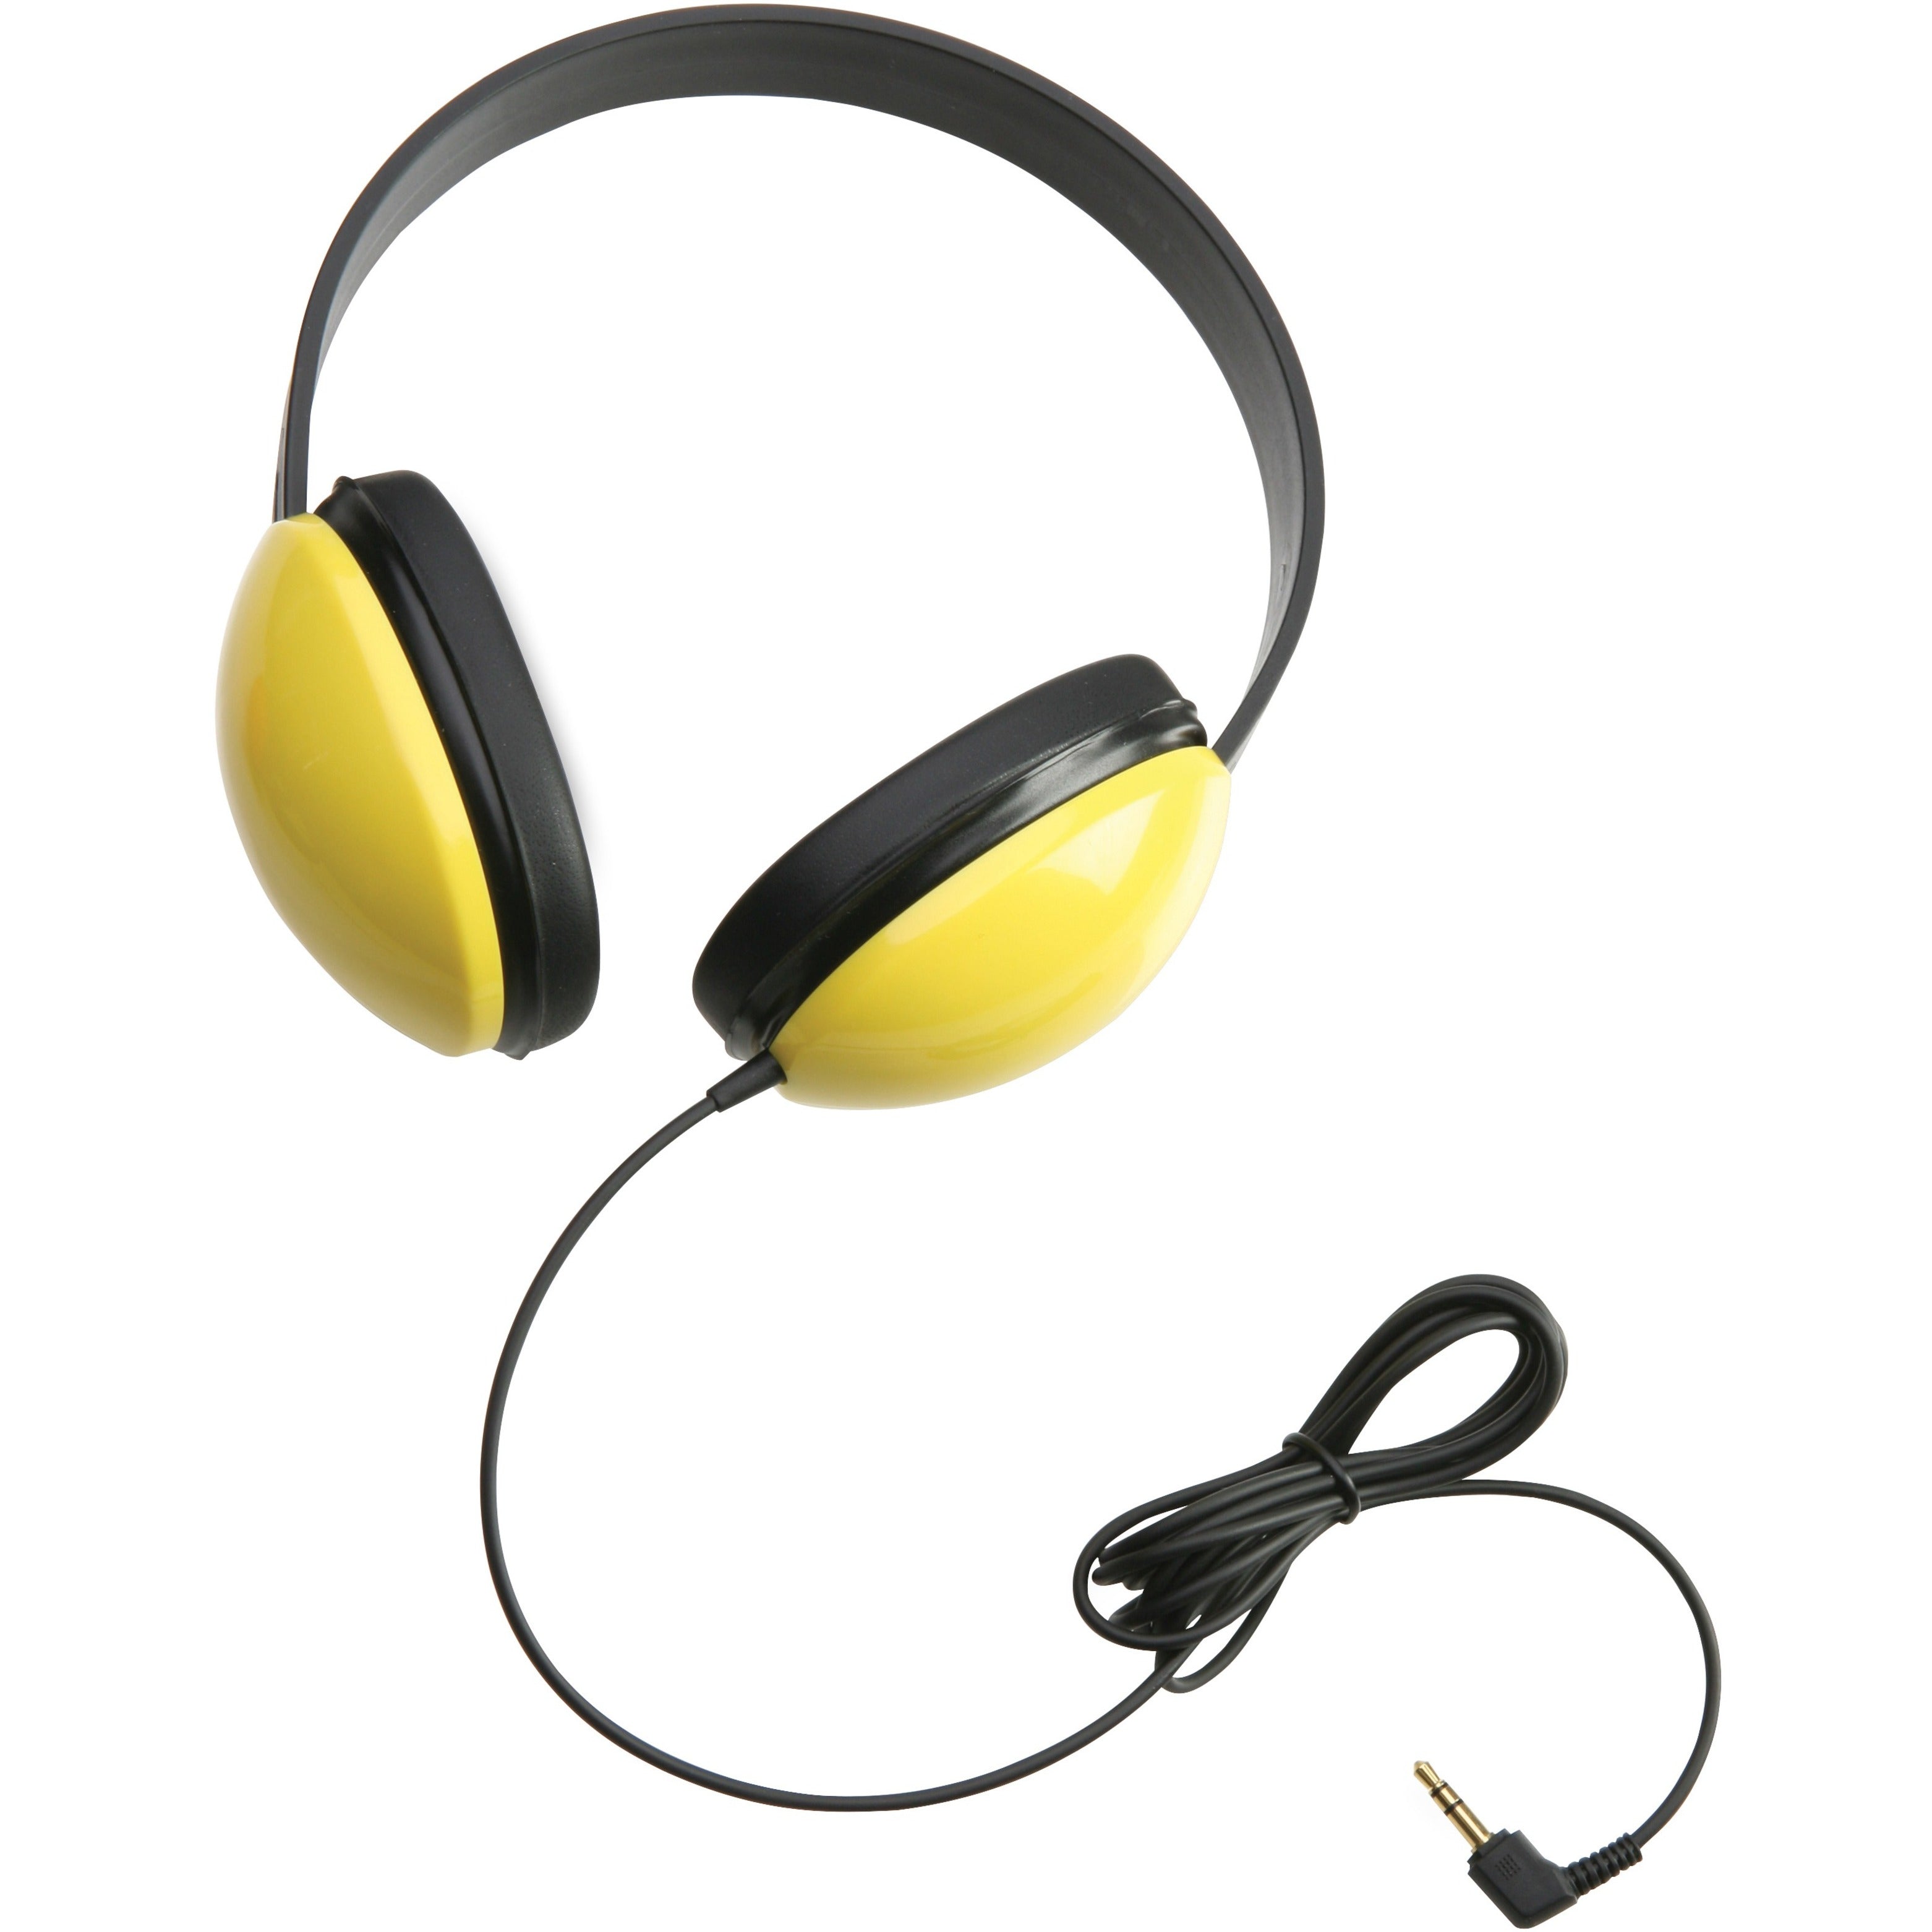 Califone 2800-YL Listening First Stereo Headphones, Over-the-head, Volume Control, Noise Reduction, Yellow